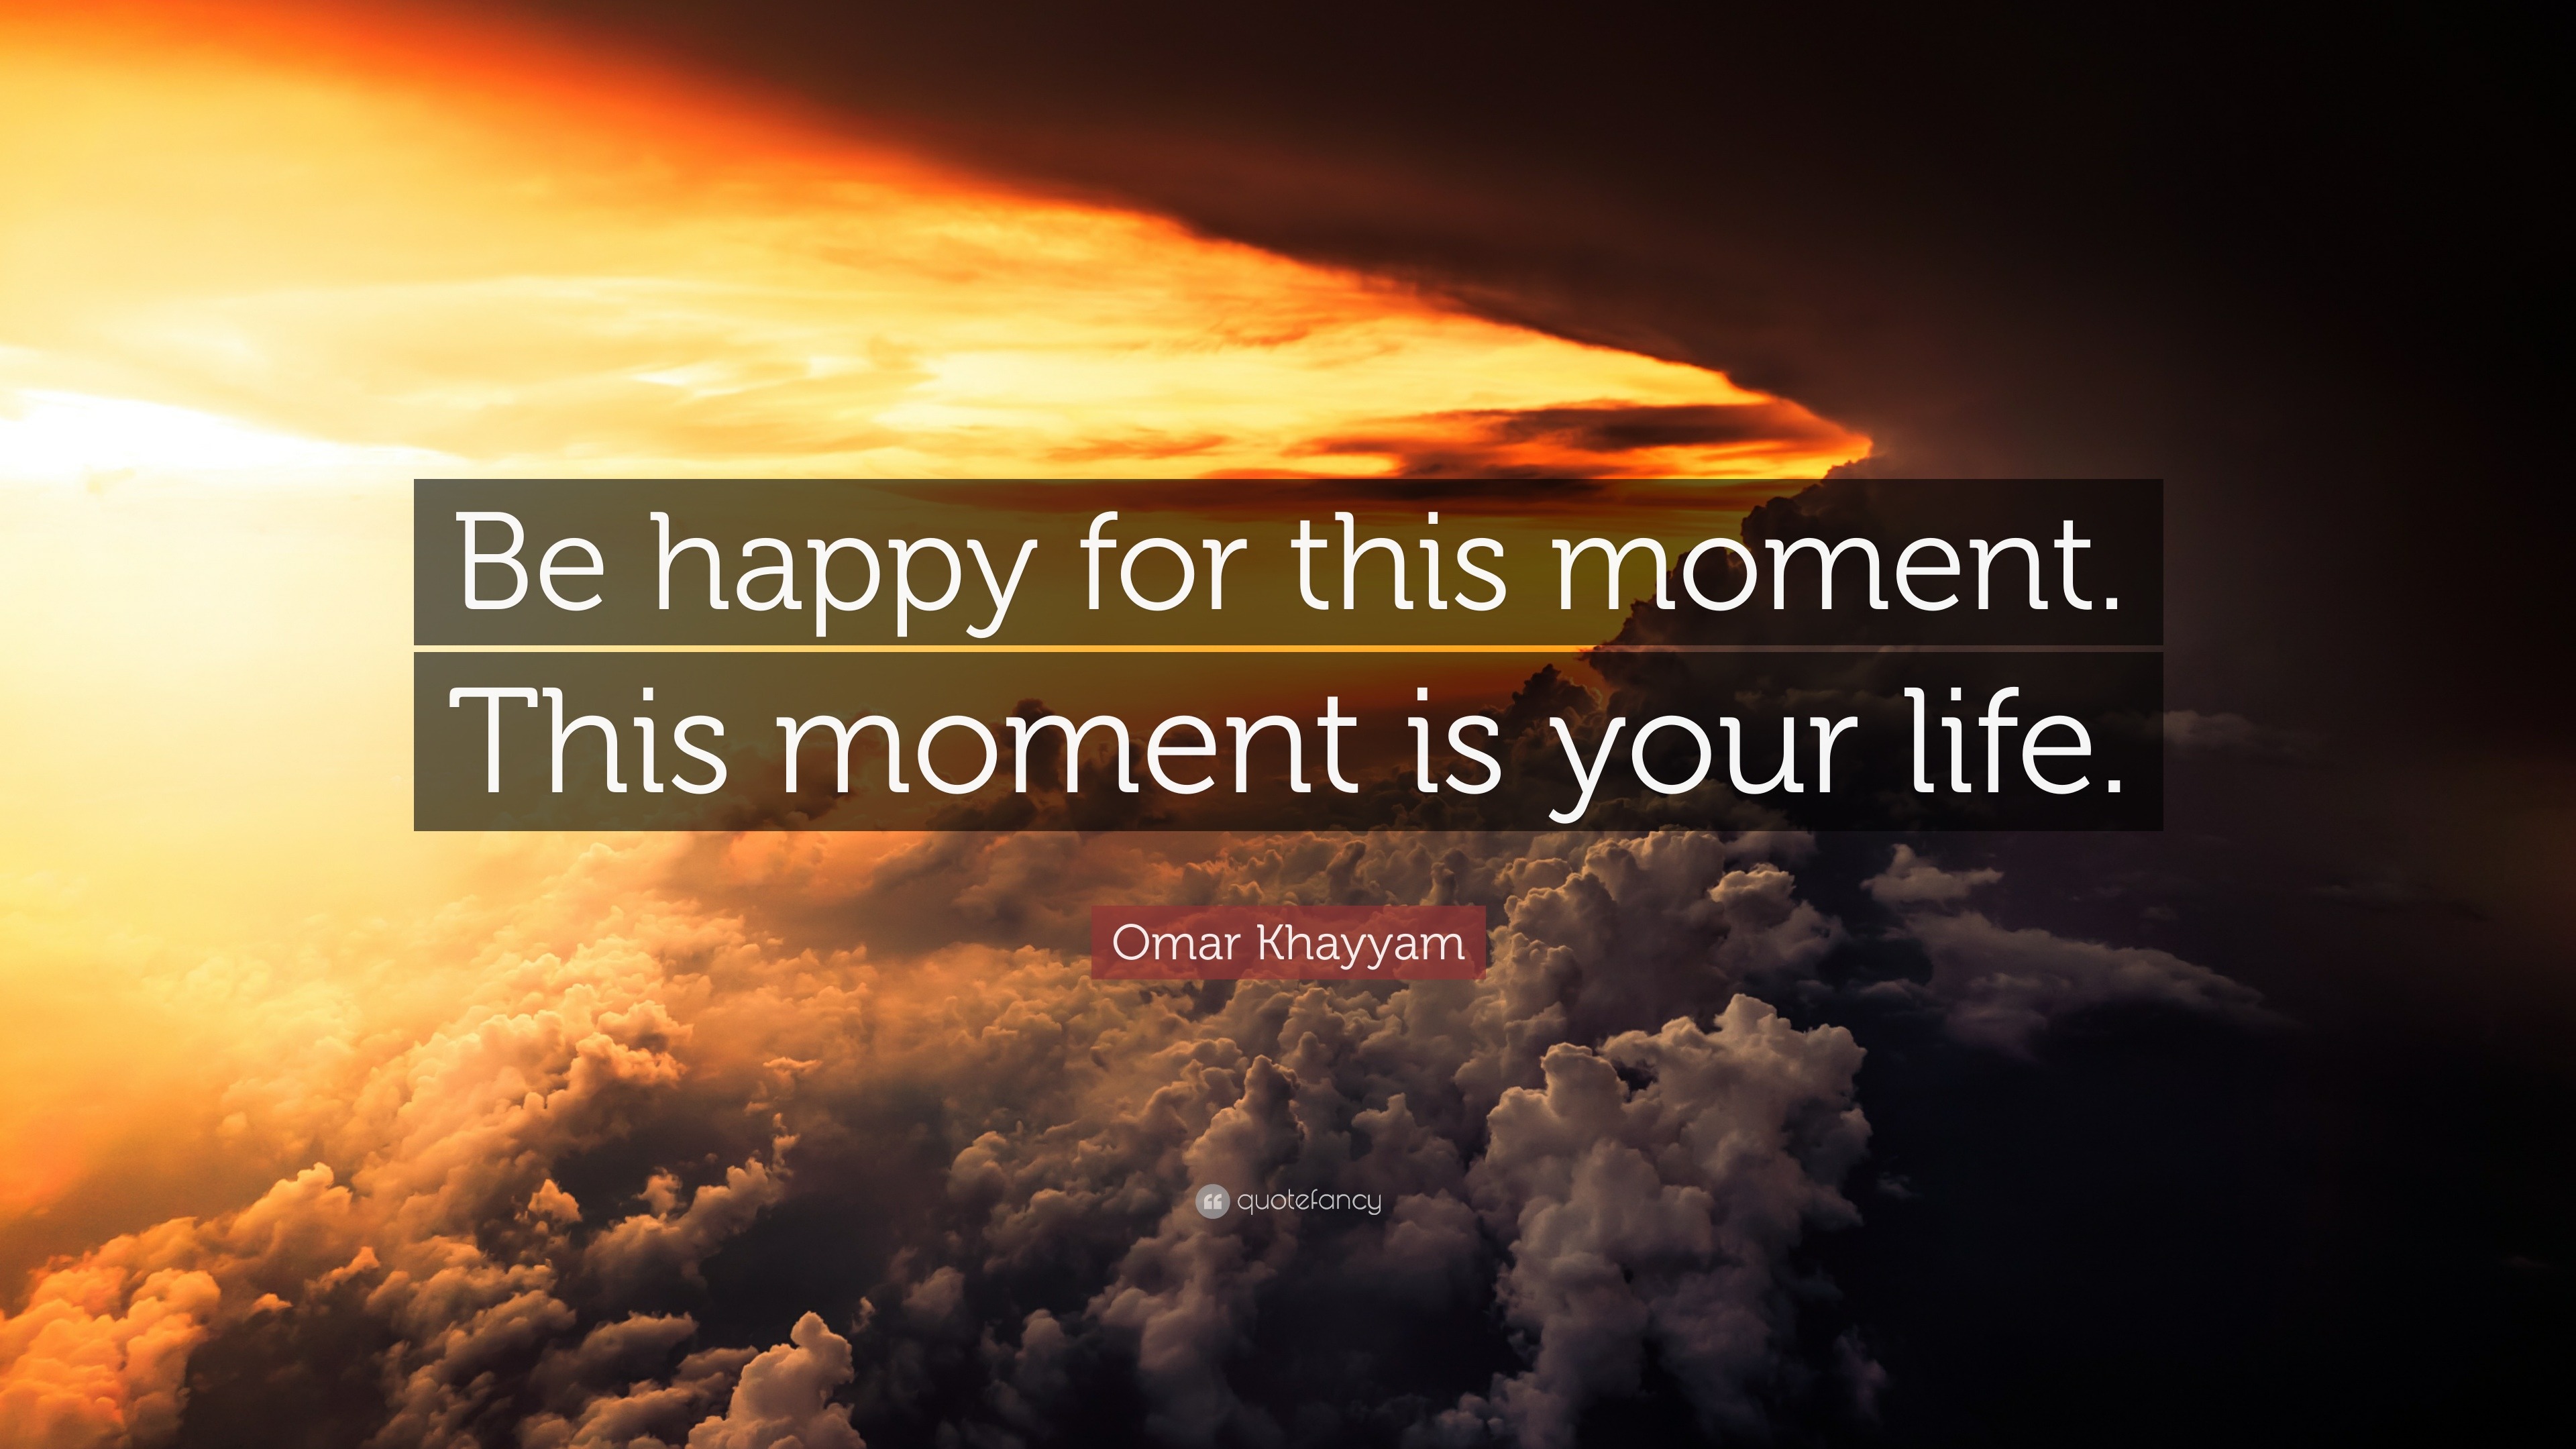 Omar Khayyam Quote “Be happy for this moment This moment is your life